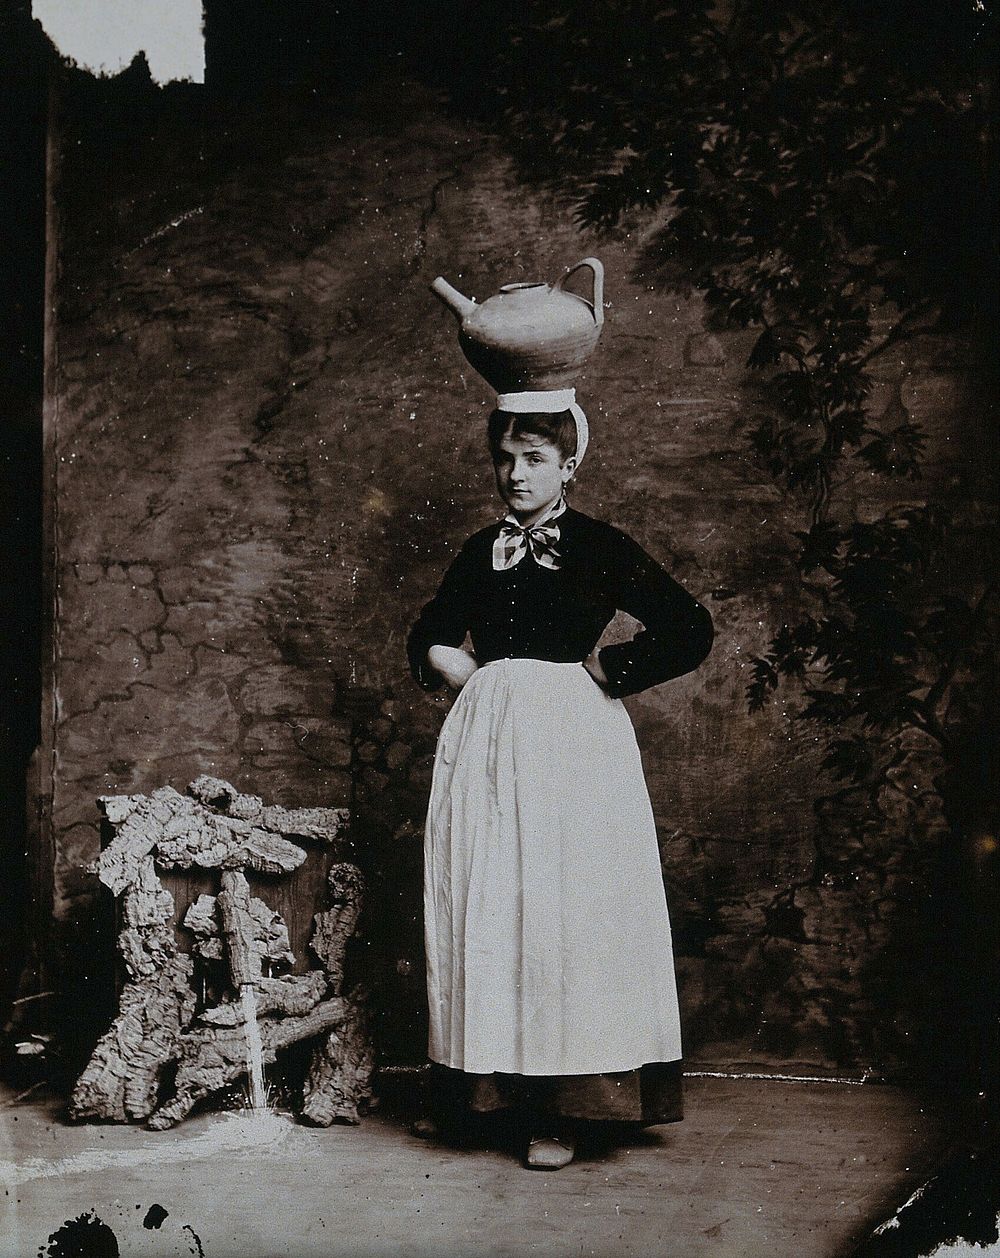 A Basque woman posing with an earthenware jug on her head.